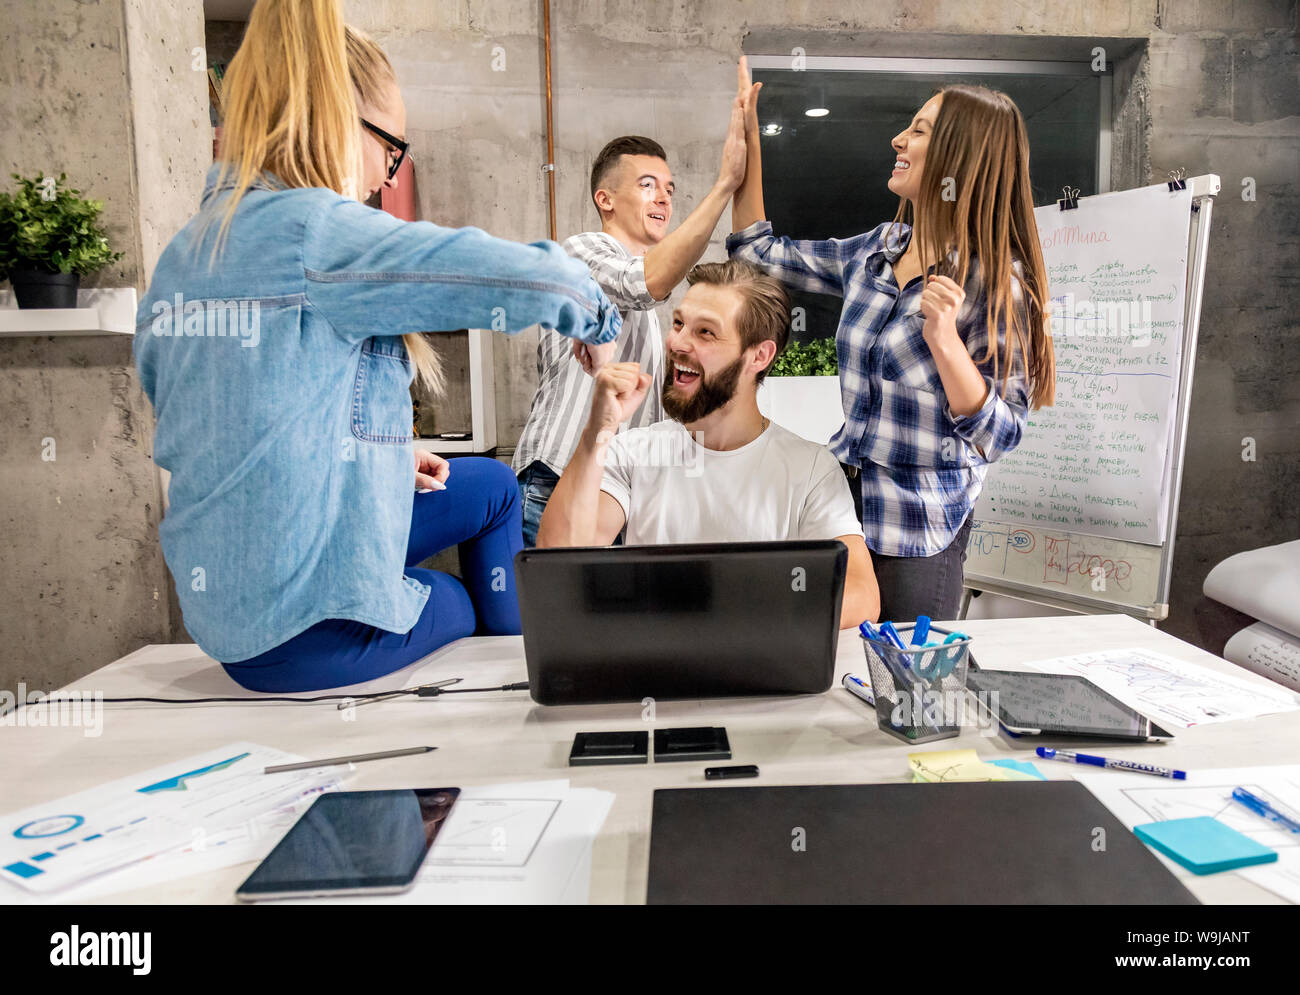 Young office workers congratulate each other on their success in a loft workspace Stock Photo